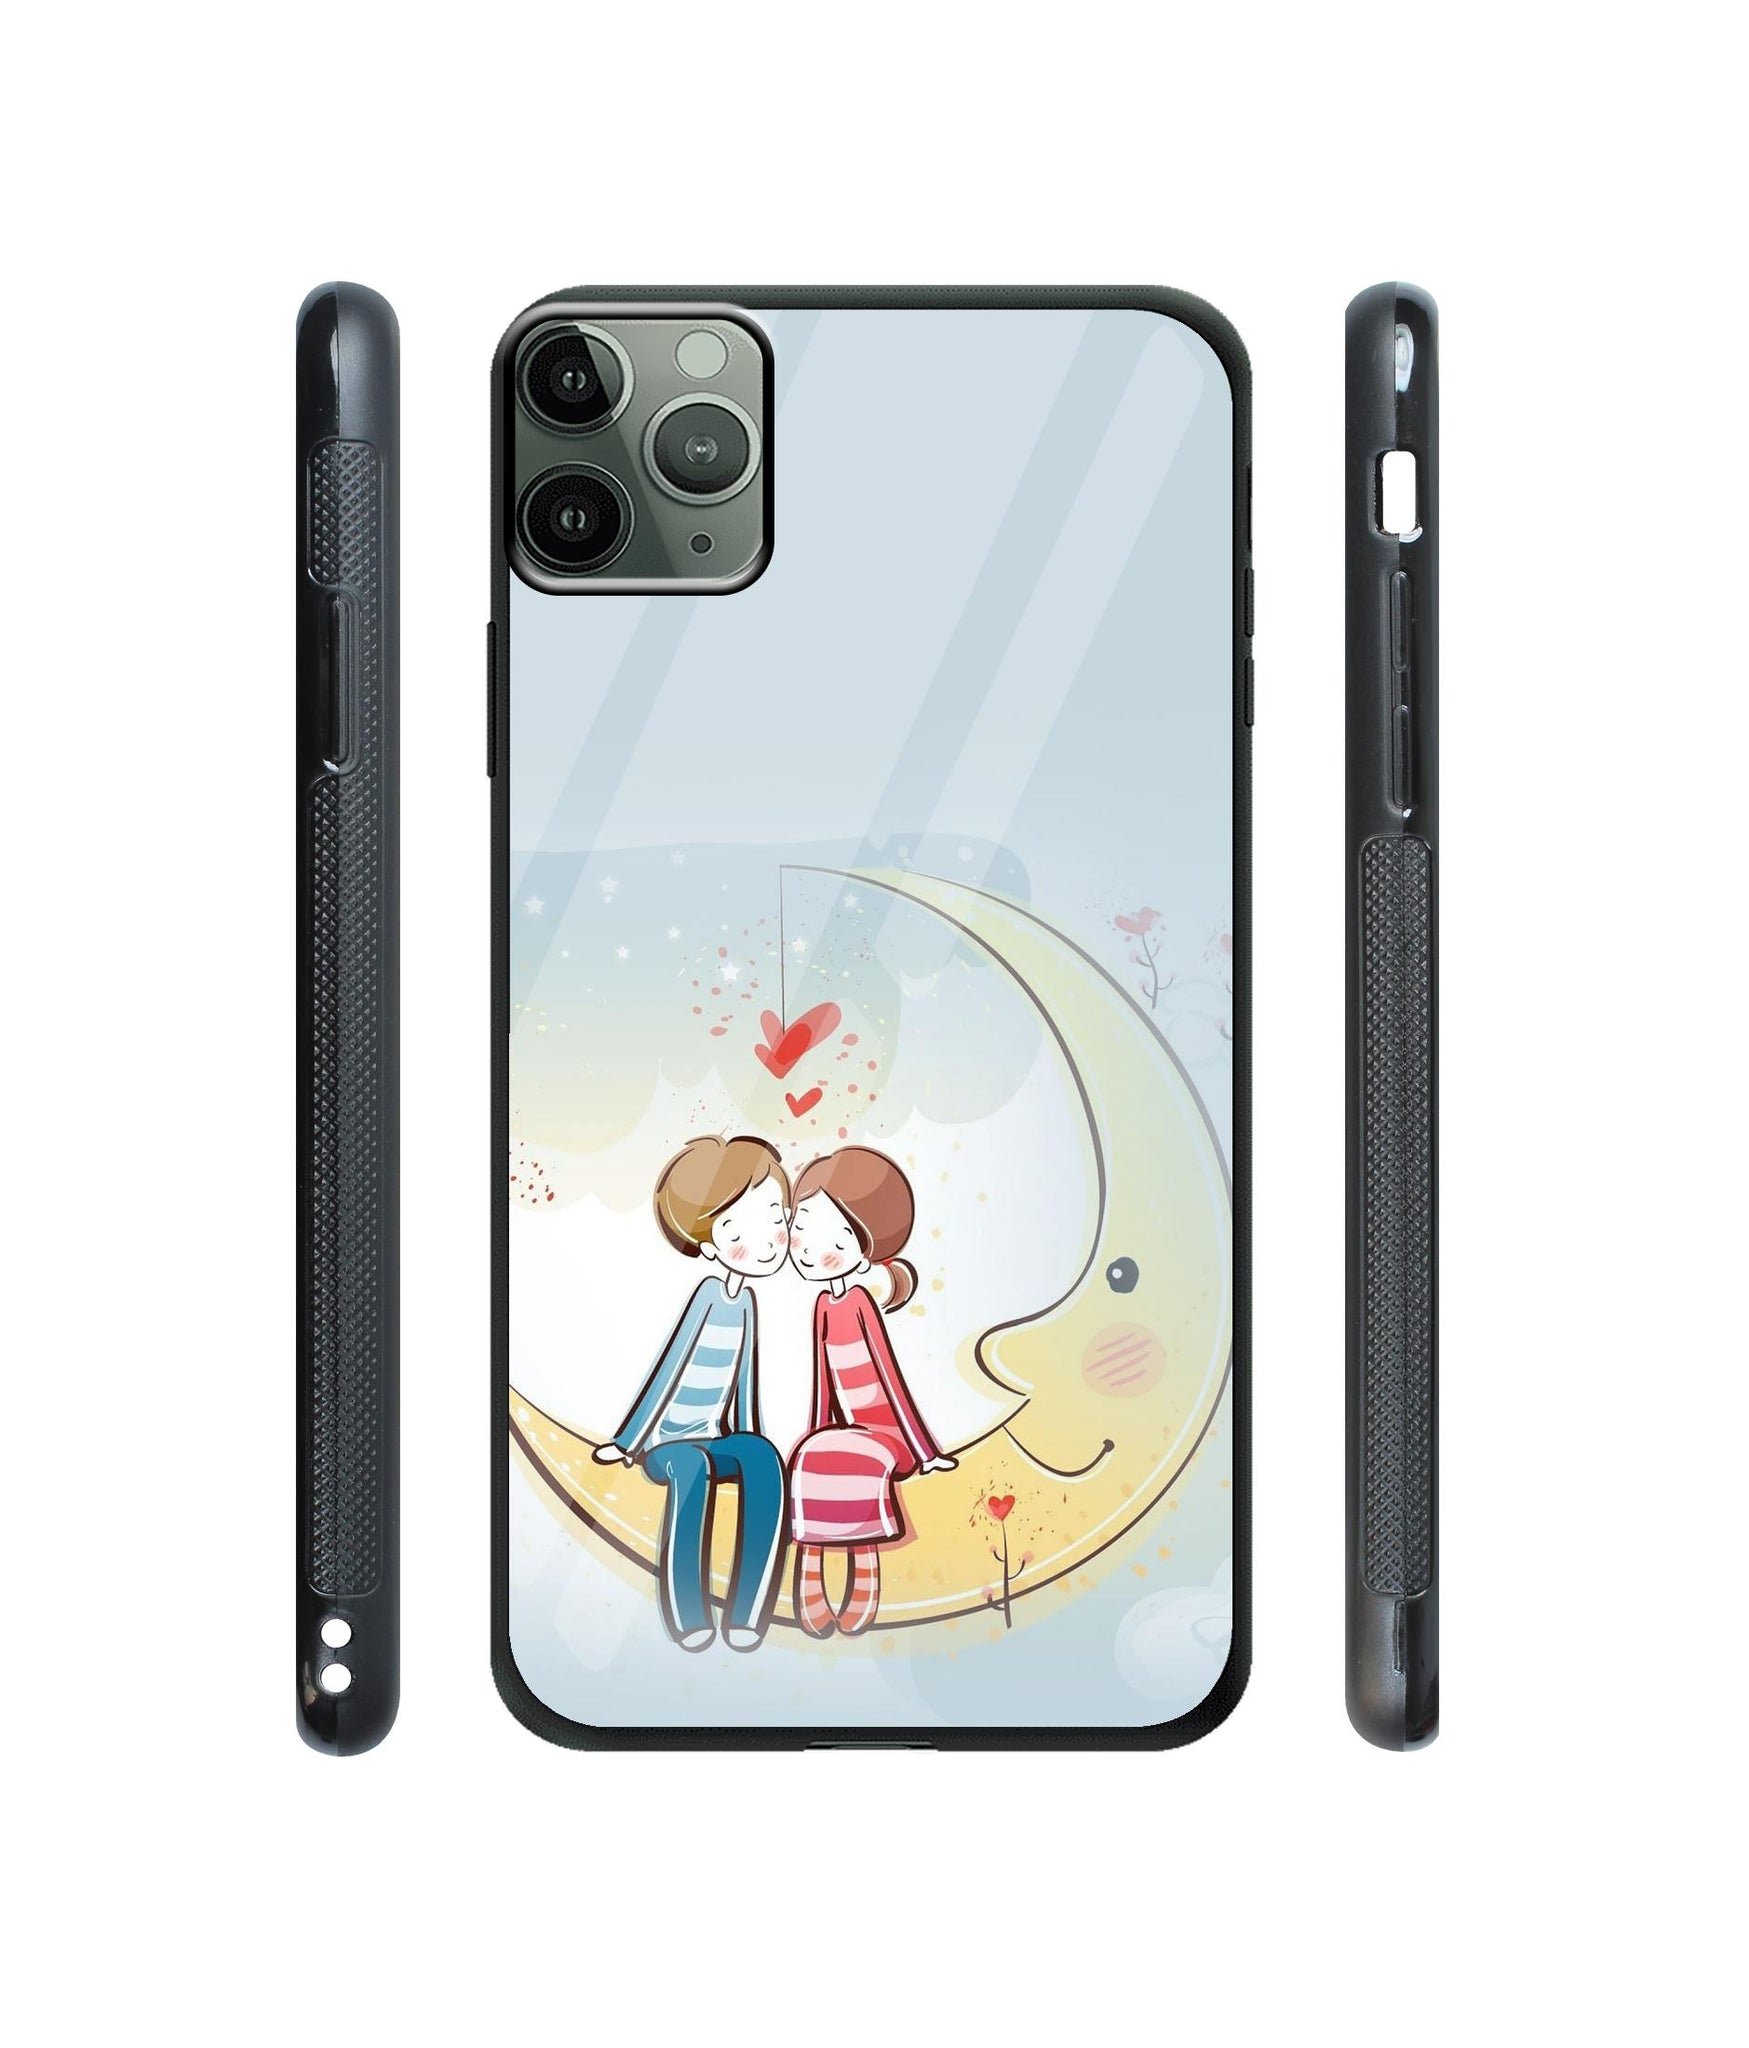 Couple Sitting On Moon Designer Printed Glass Cover for Apple iPhone 11 Pro Max